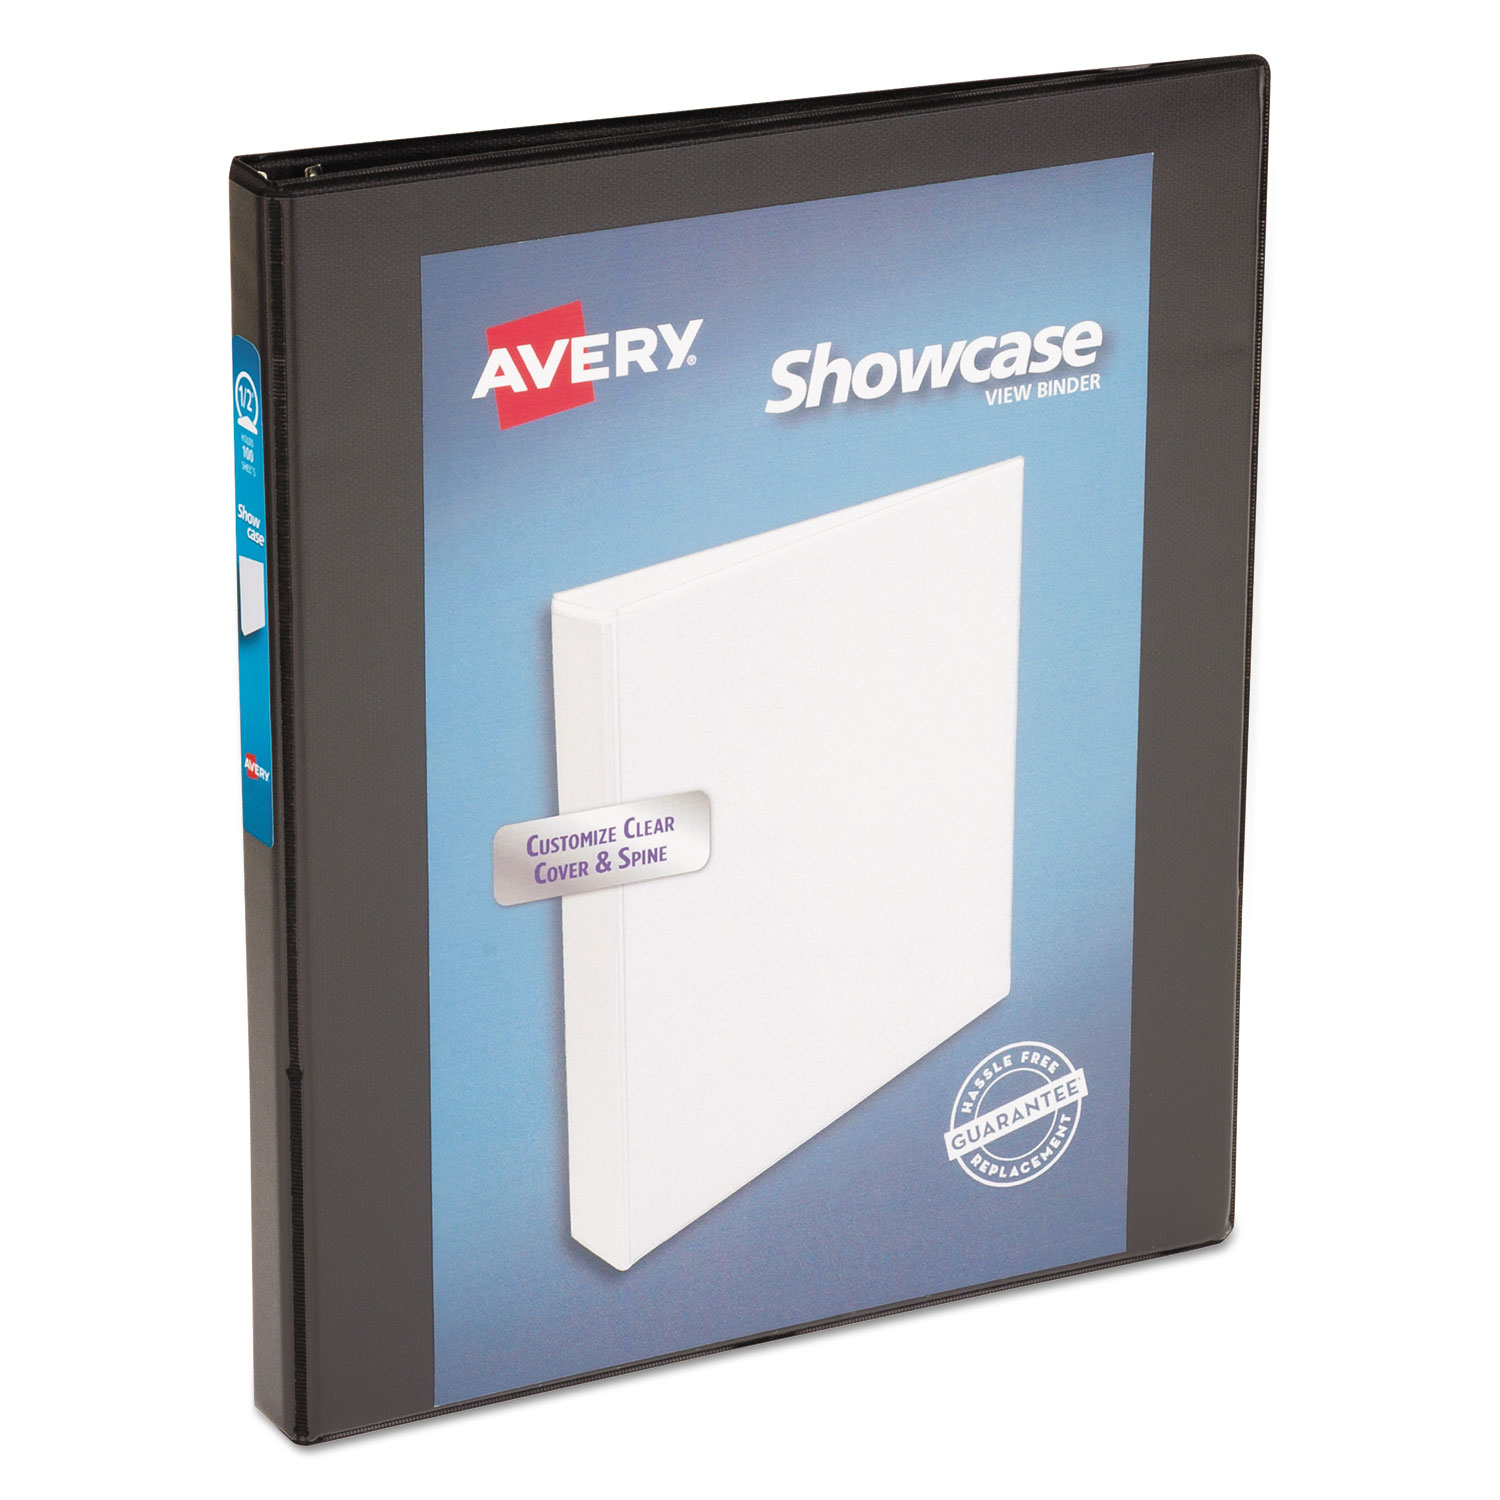  Avery 19550 Showcase Economy View Binder with Round Rings, 3 Rings, 0.5 Capacity, 11 x 8.5, Black (AVE19550) 